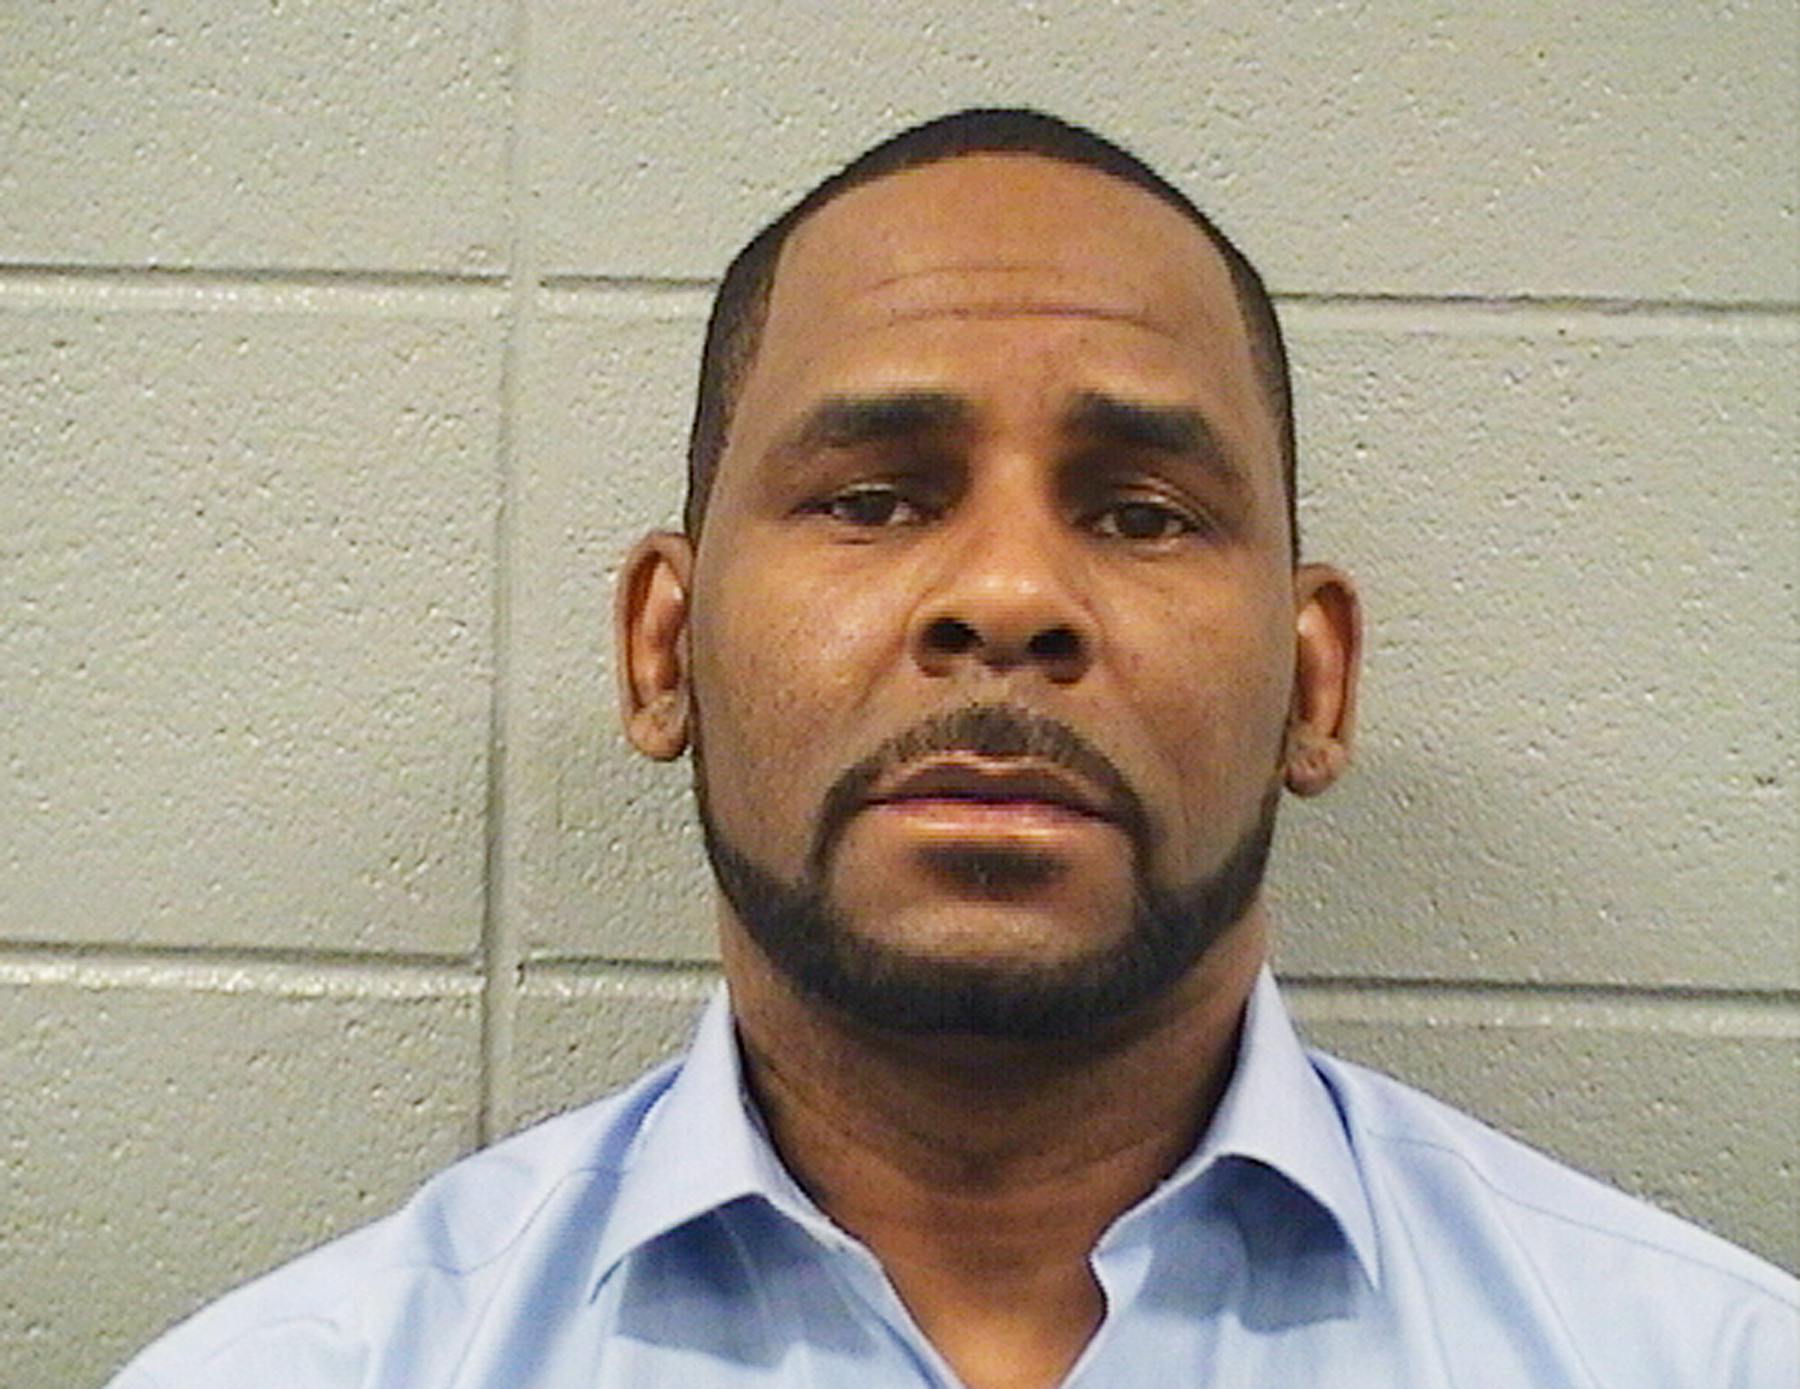 Prosecutors Say R. Kelly Should Get 25 Years in Prison for Sexually Abusing Women and Girls